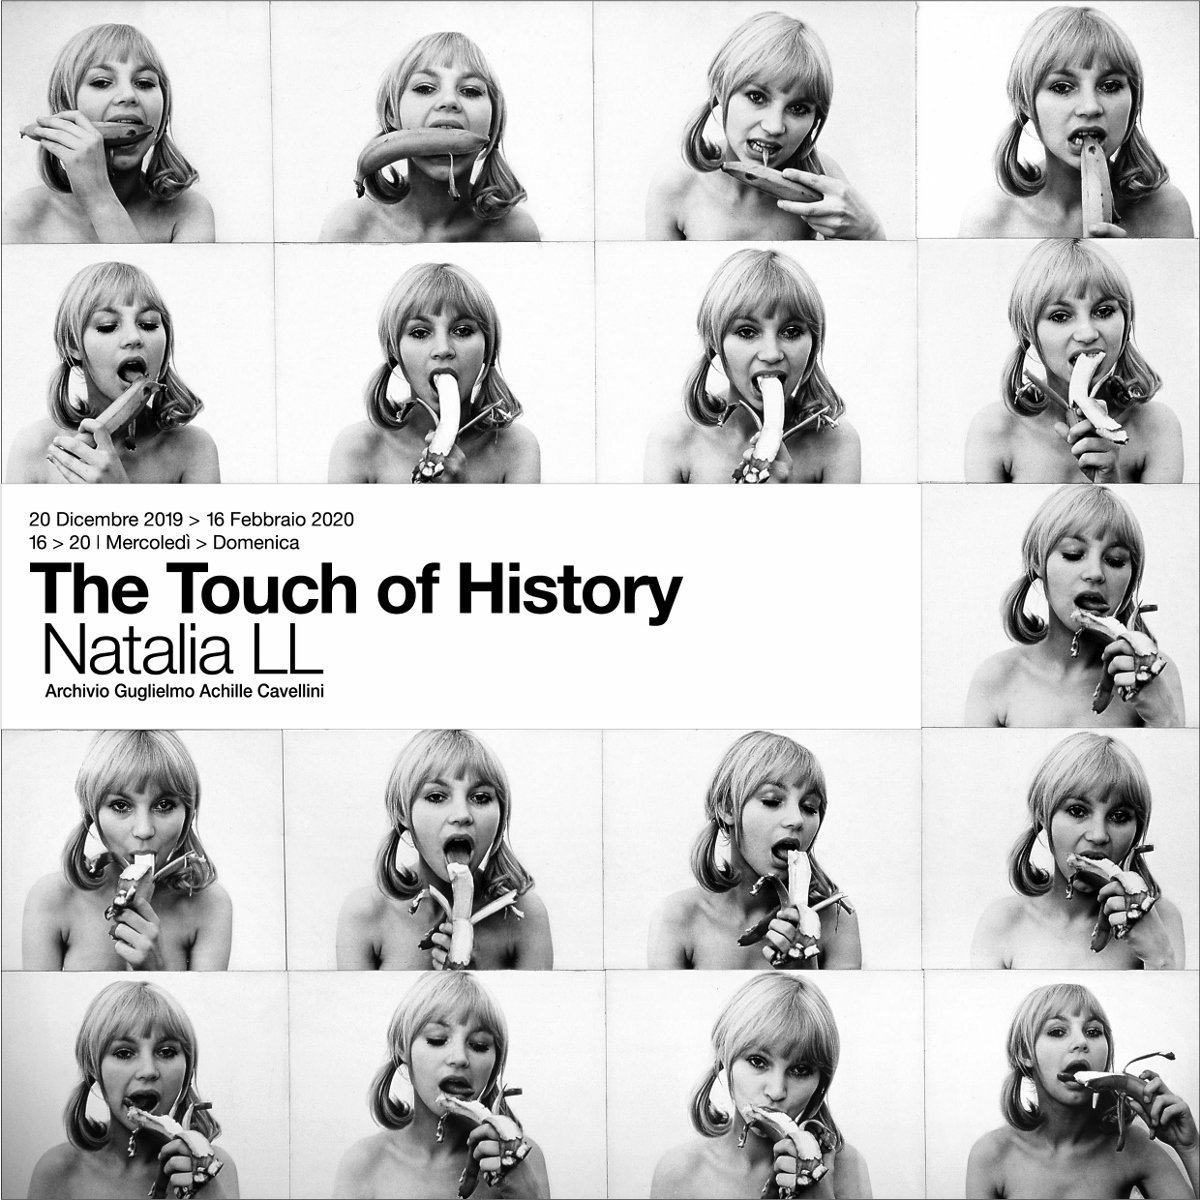 Natalia LL - The Touch of History